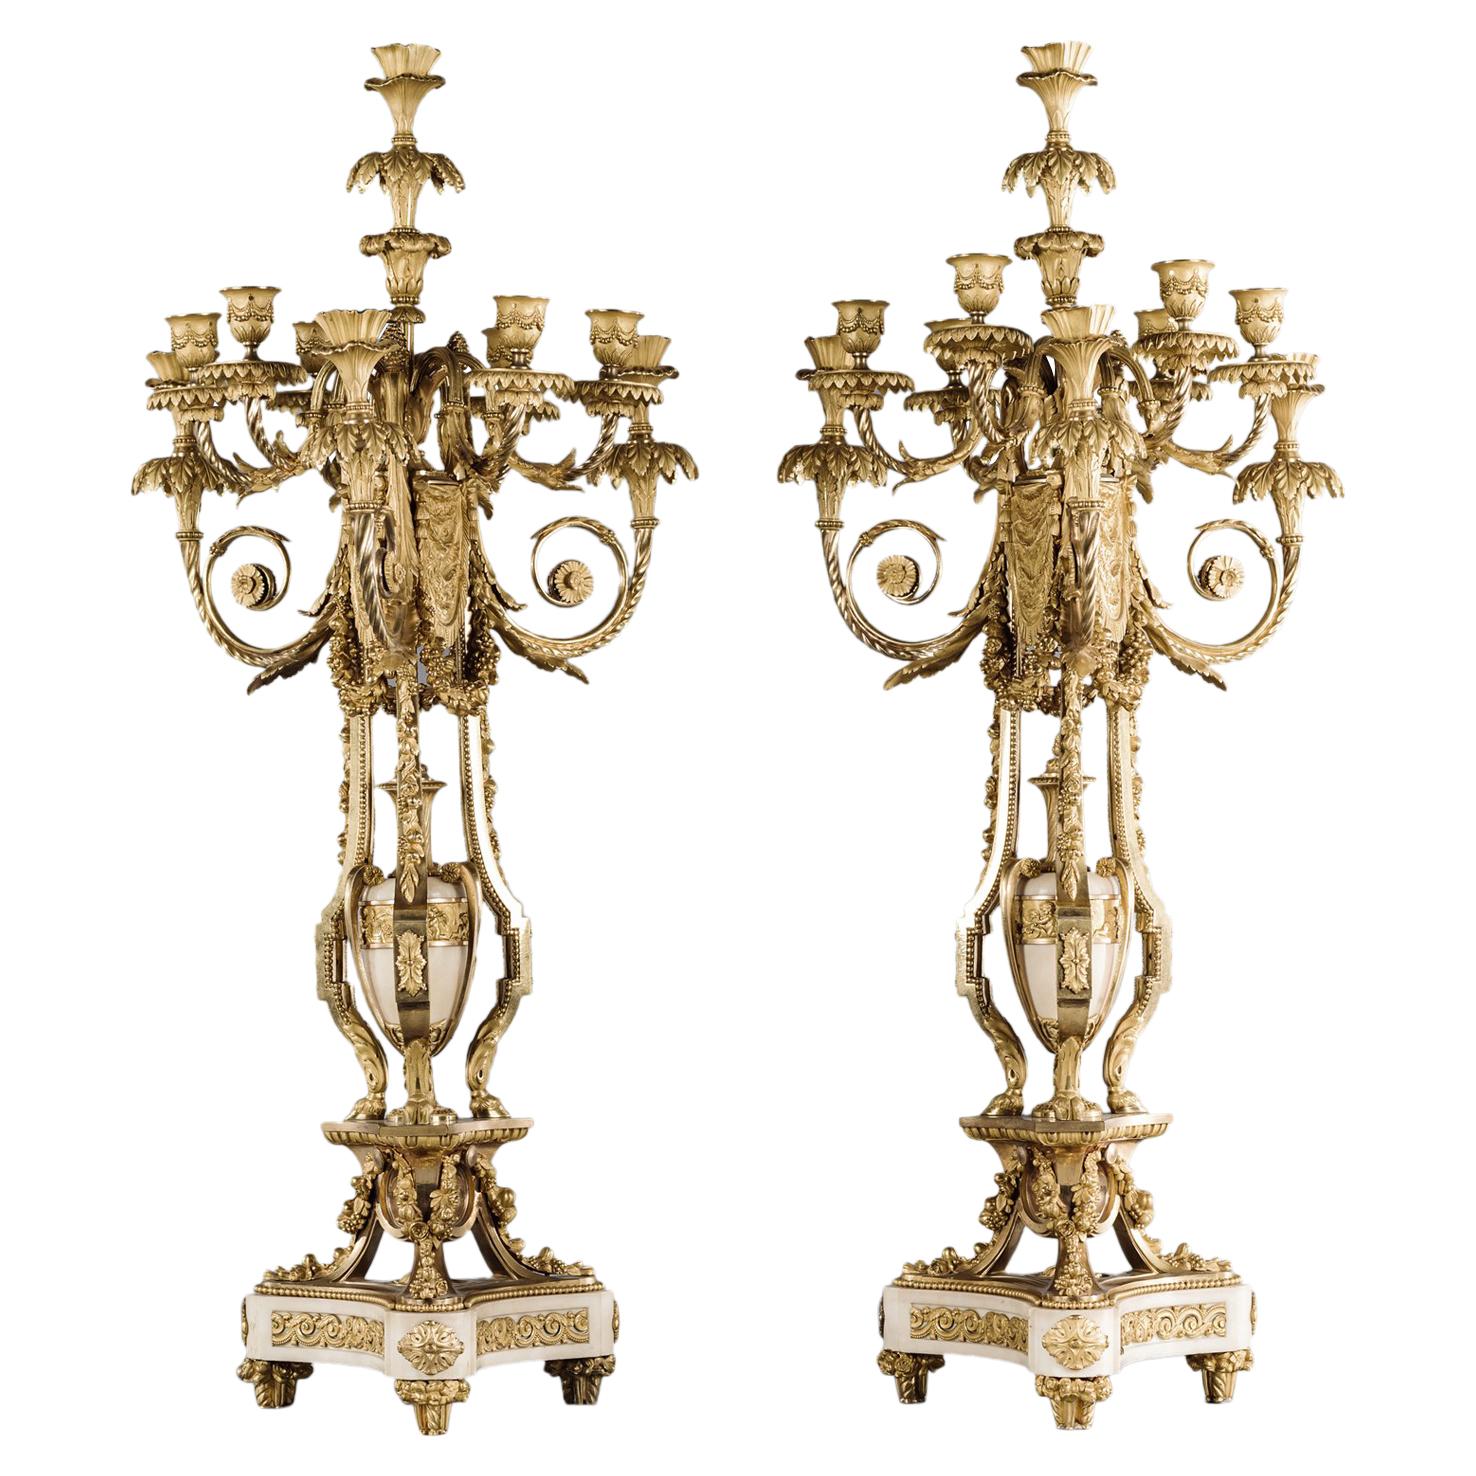 Pair Of Ten-Light Candelabra After Pierre Gouthière, by Henri Picard, Circa 1870